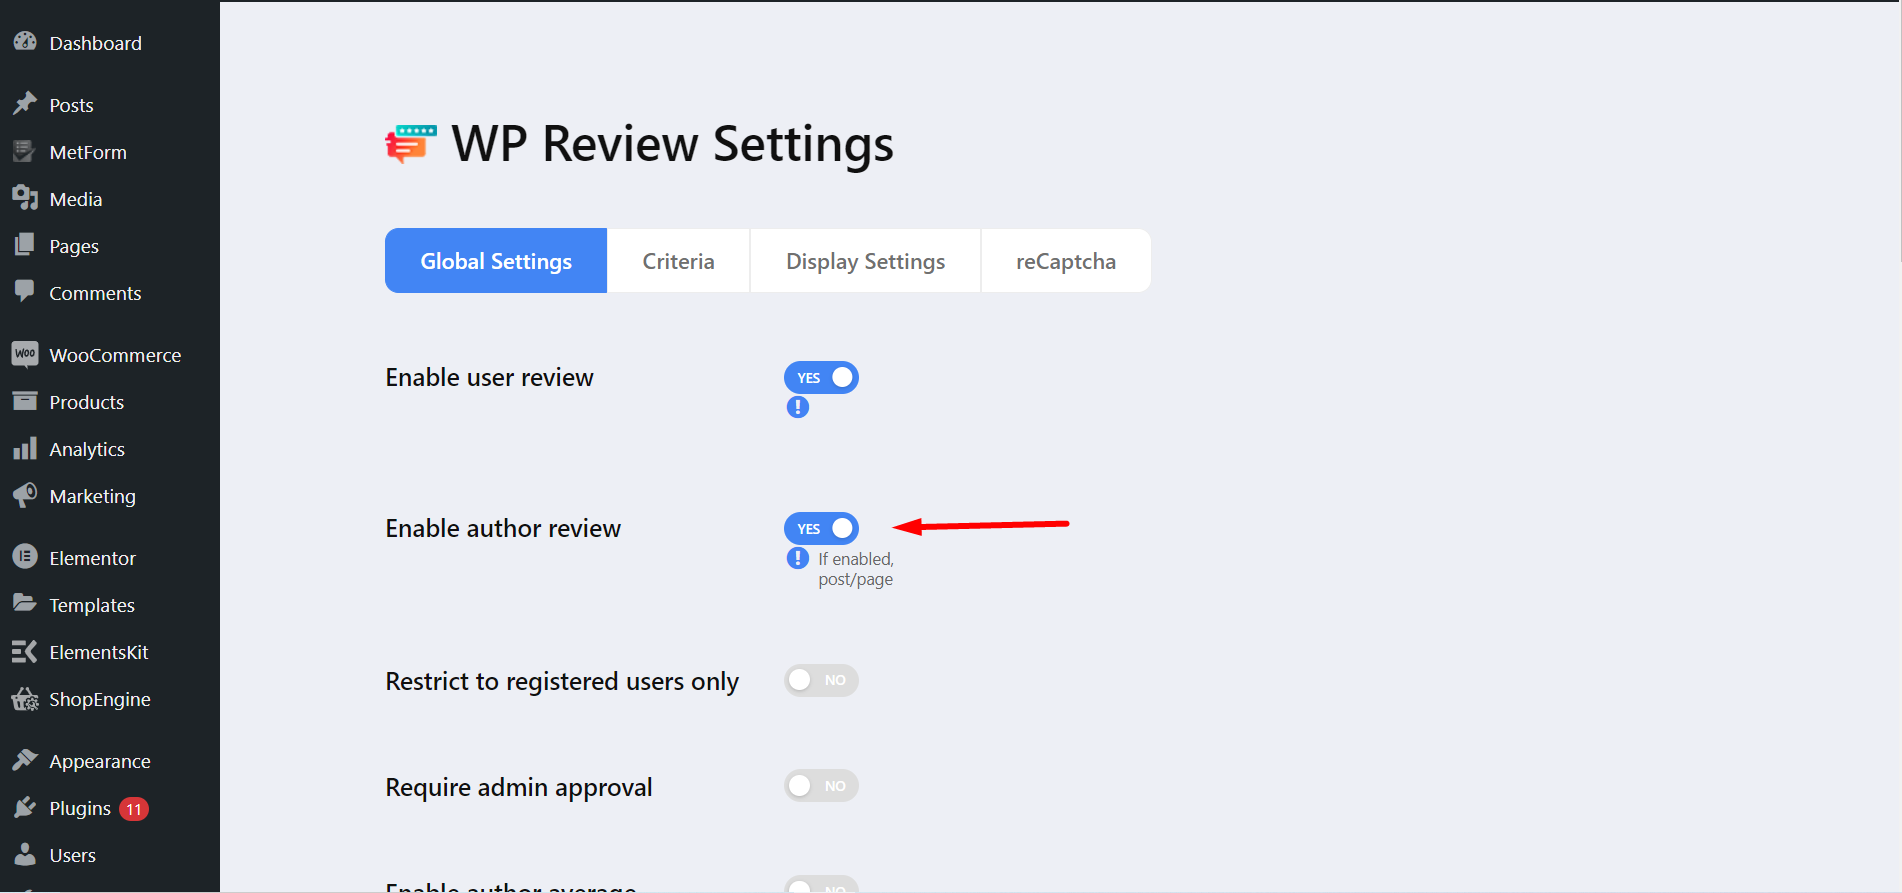 ultimate review global settings- enabling author review